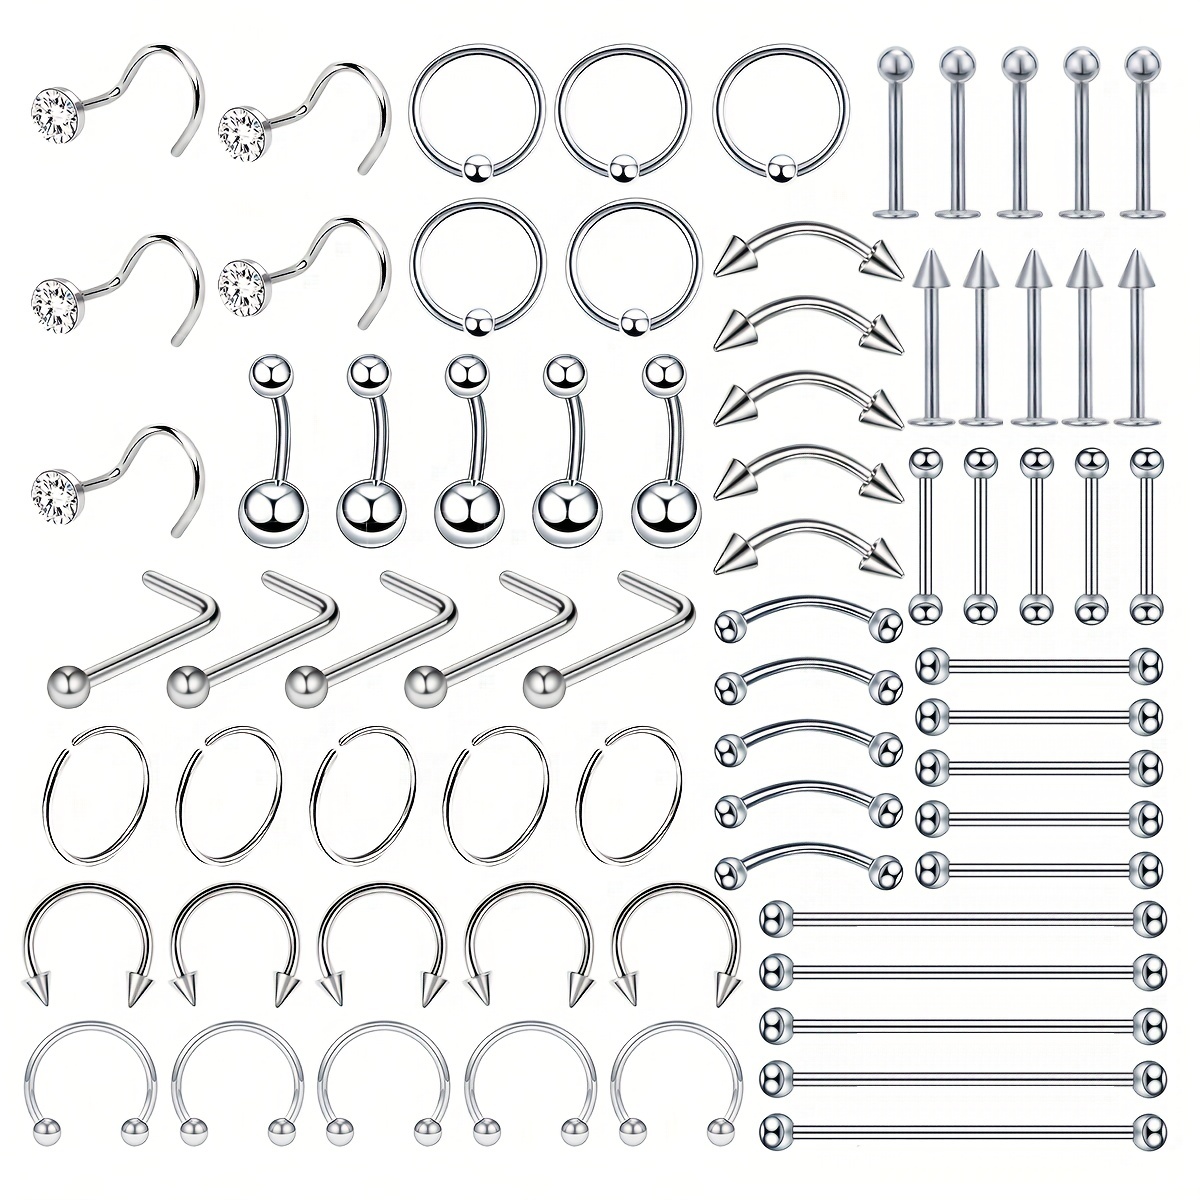 Piercing Kit Stainless Steel Jewelry with Belly Button Ring Nose Ring